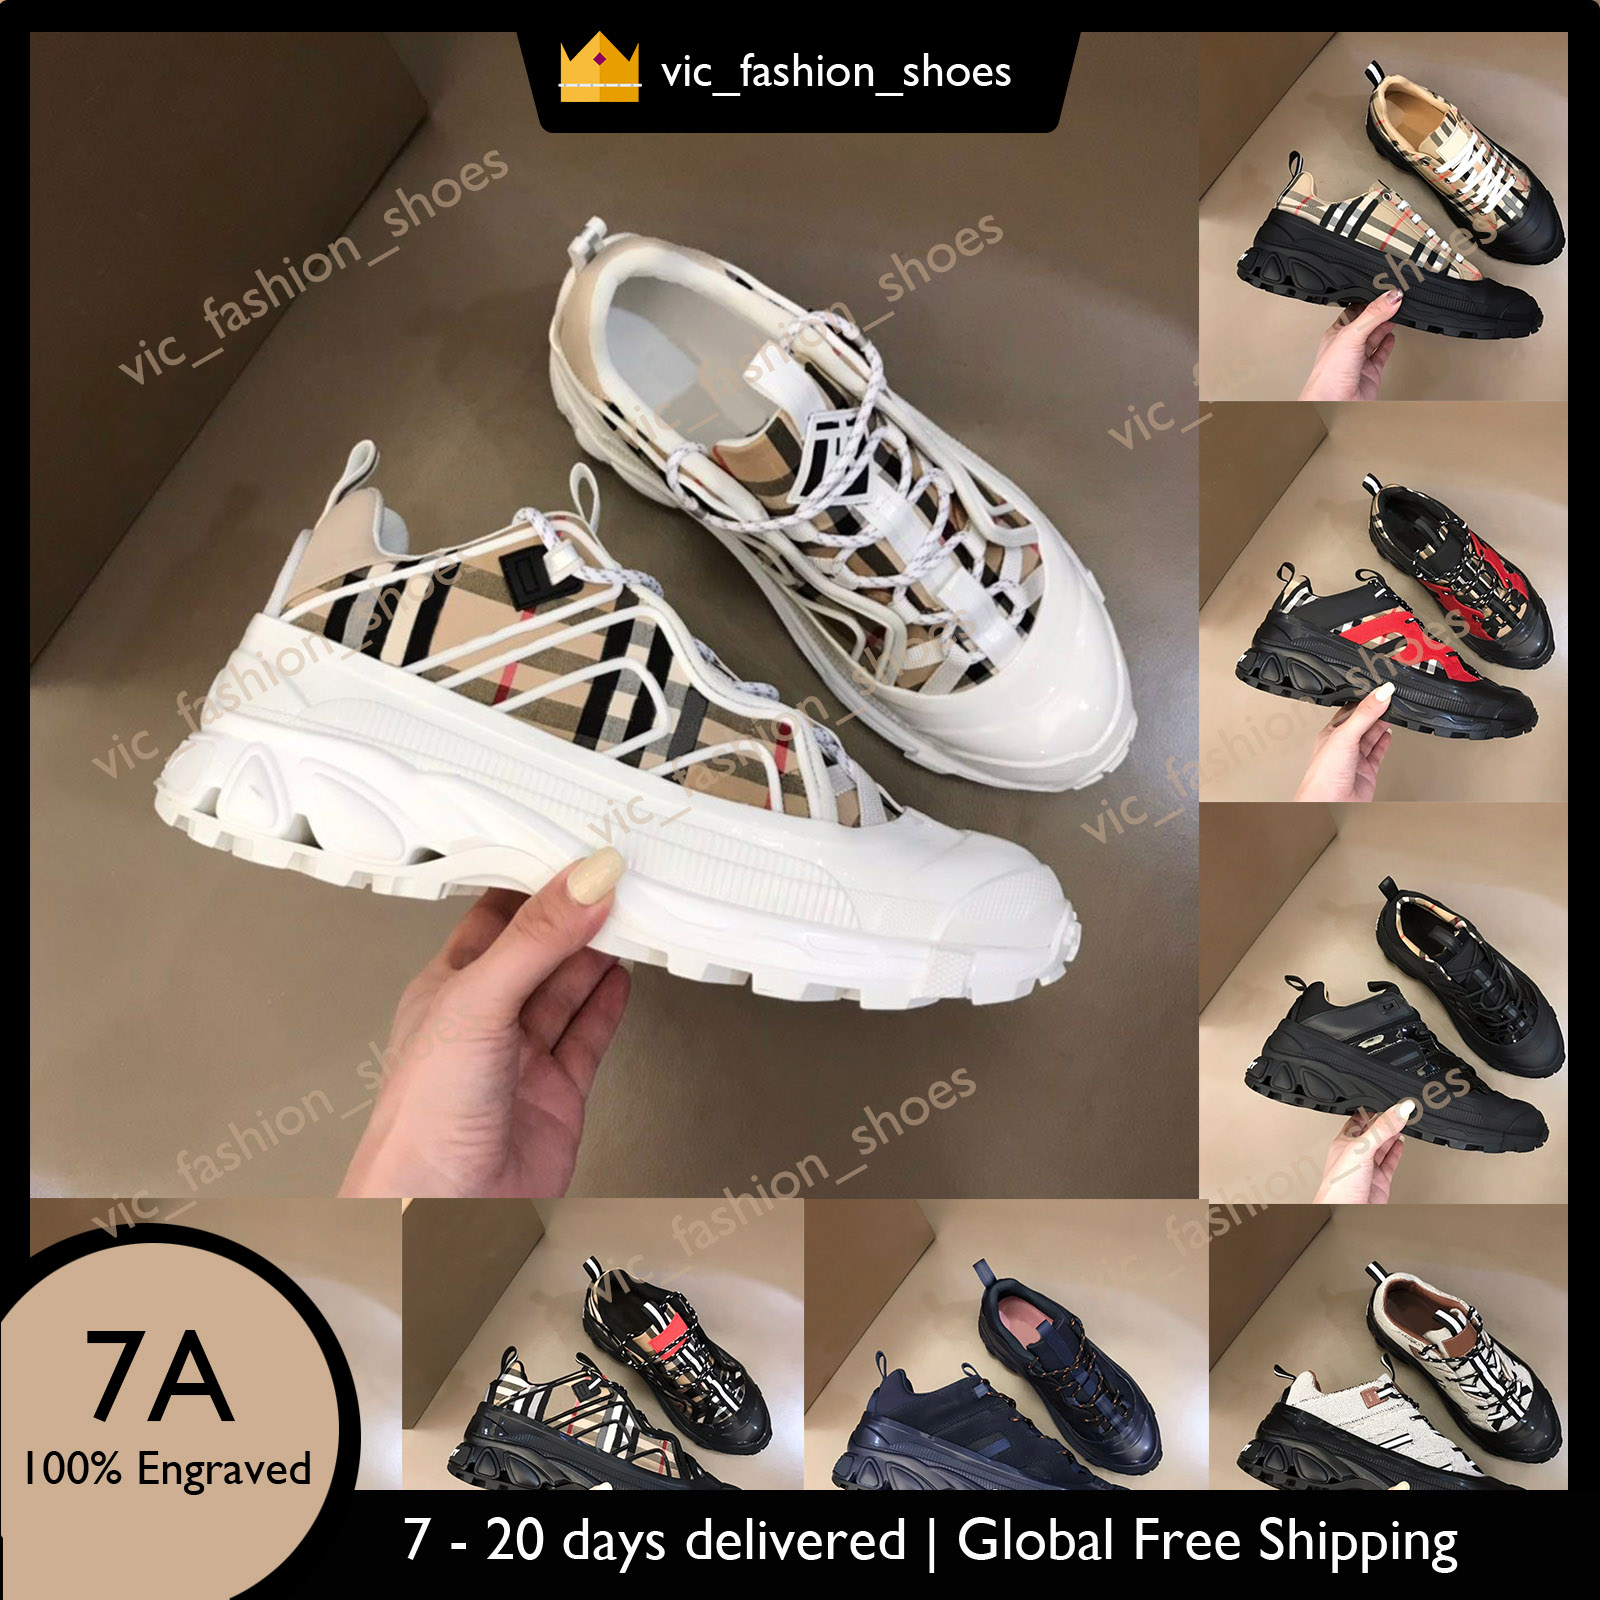 

7A Designer Arthur Vintage Sneakers Mens Casual Shoes Striped Fashion Shoe Luxury Trainers Check Lace-up Platform Cotton Sneaker Plaid With Box 38-45